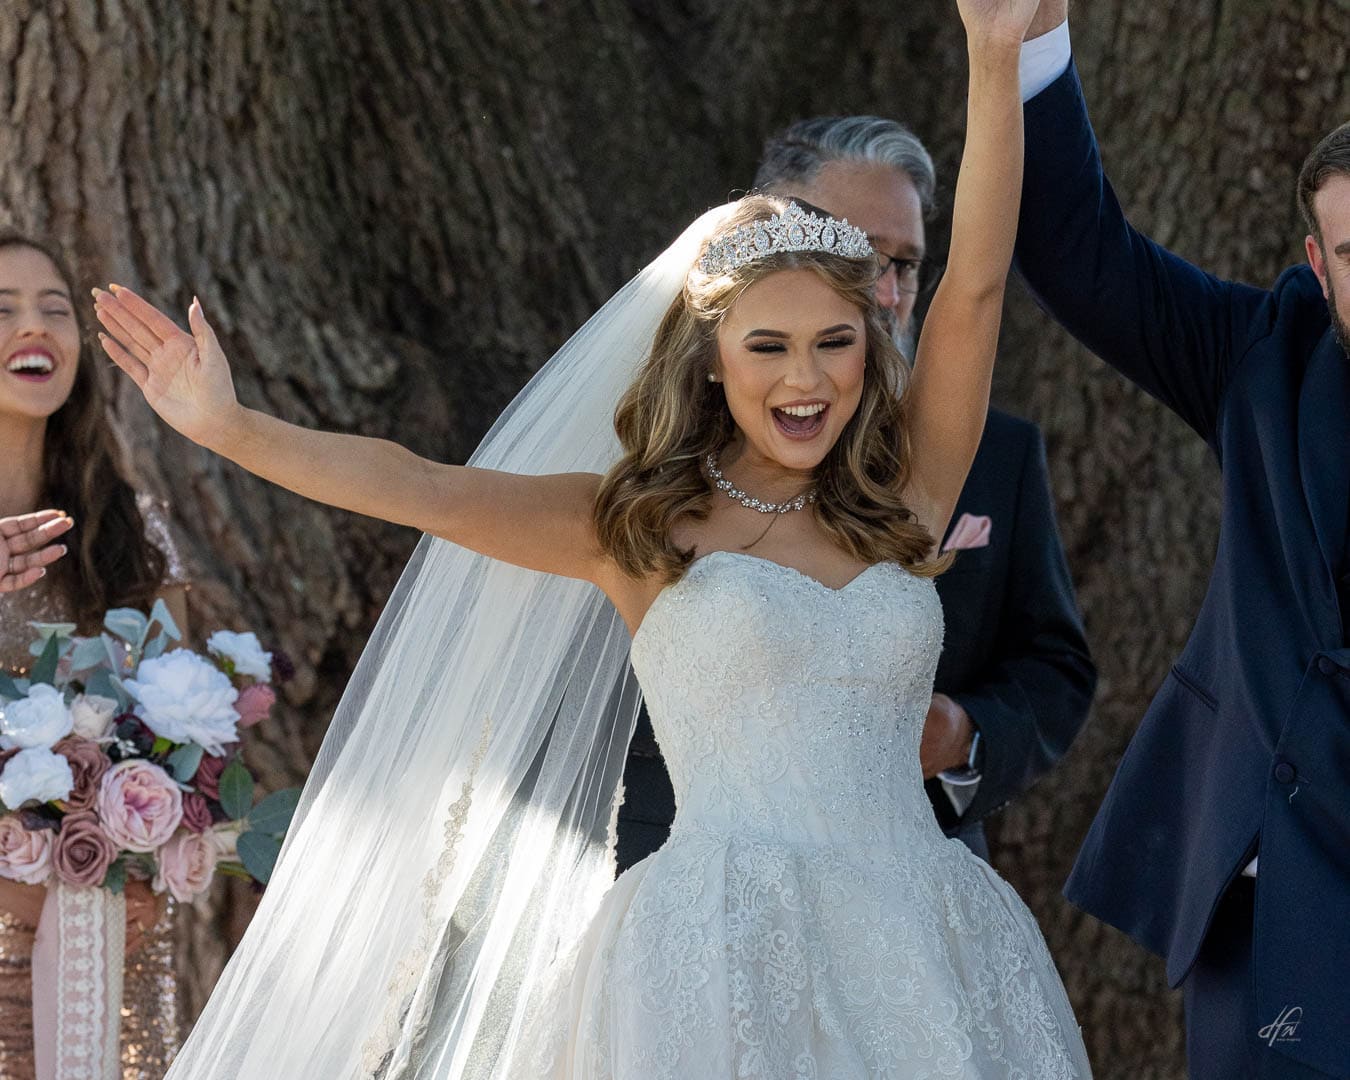 Happy bride with smile and arms up in celebration after ceremony.